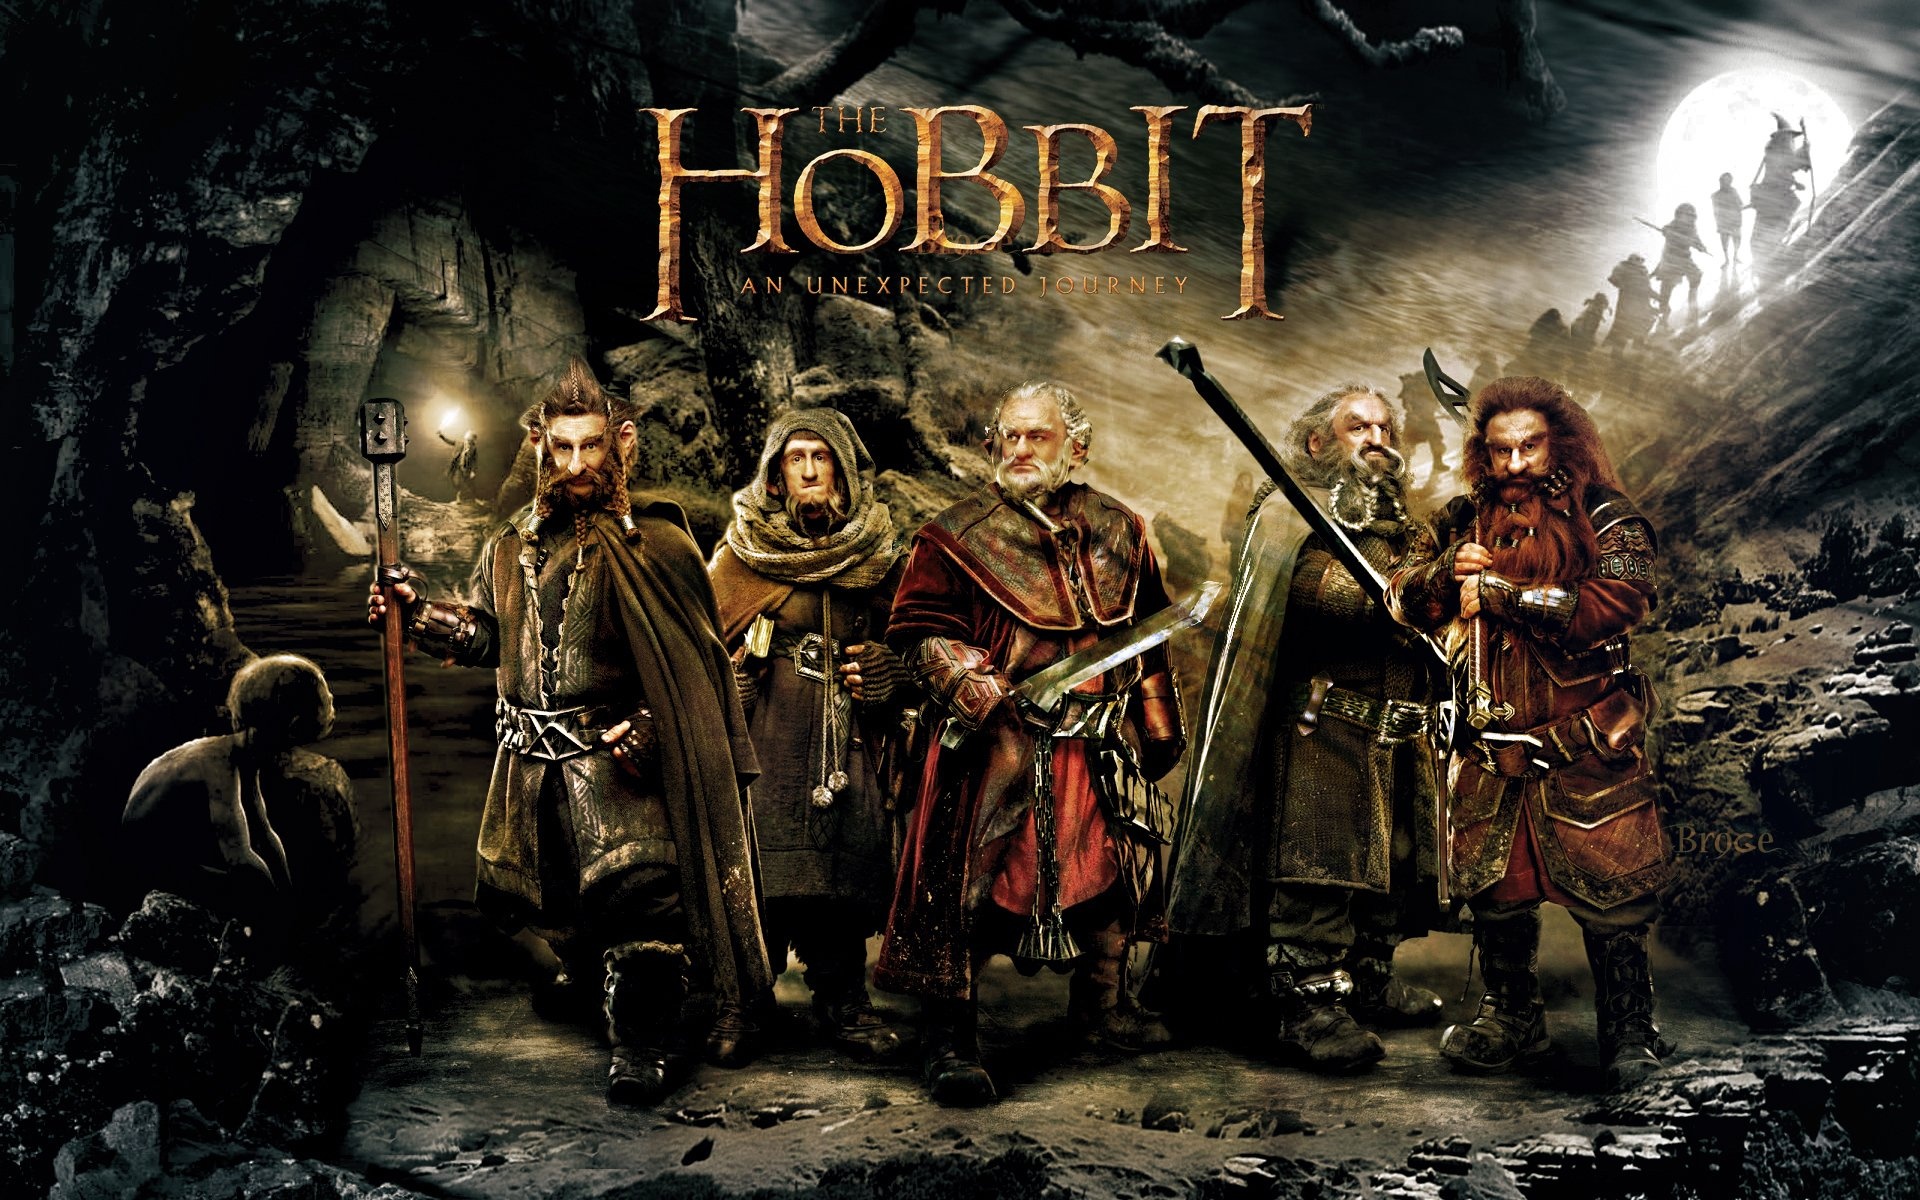 The Hobbit (Movie): Dwarves, A race of Middle-earth also known as the Khazad. 1920x1200 HD Wallpaper.